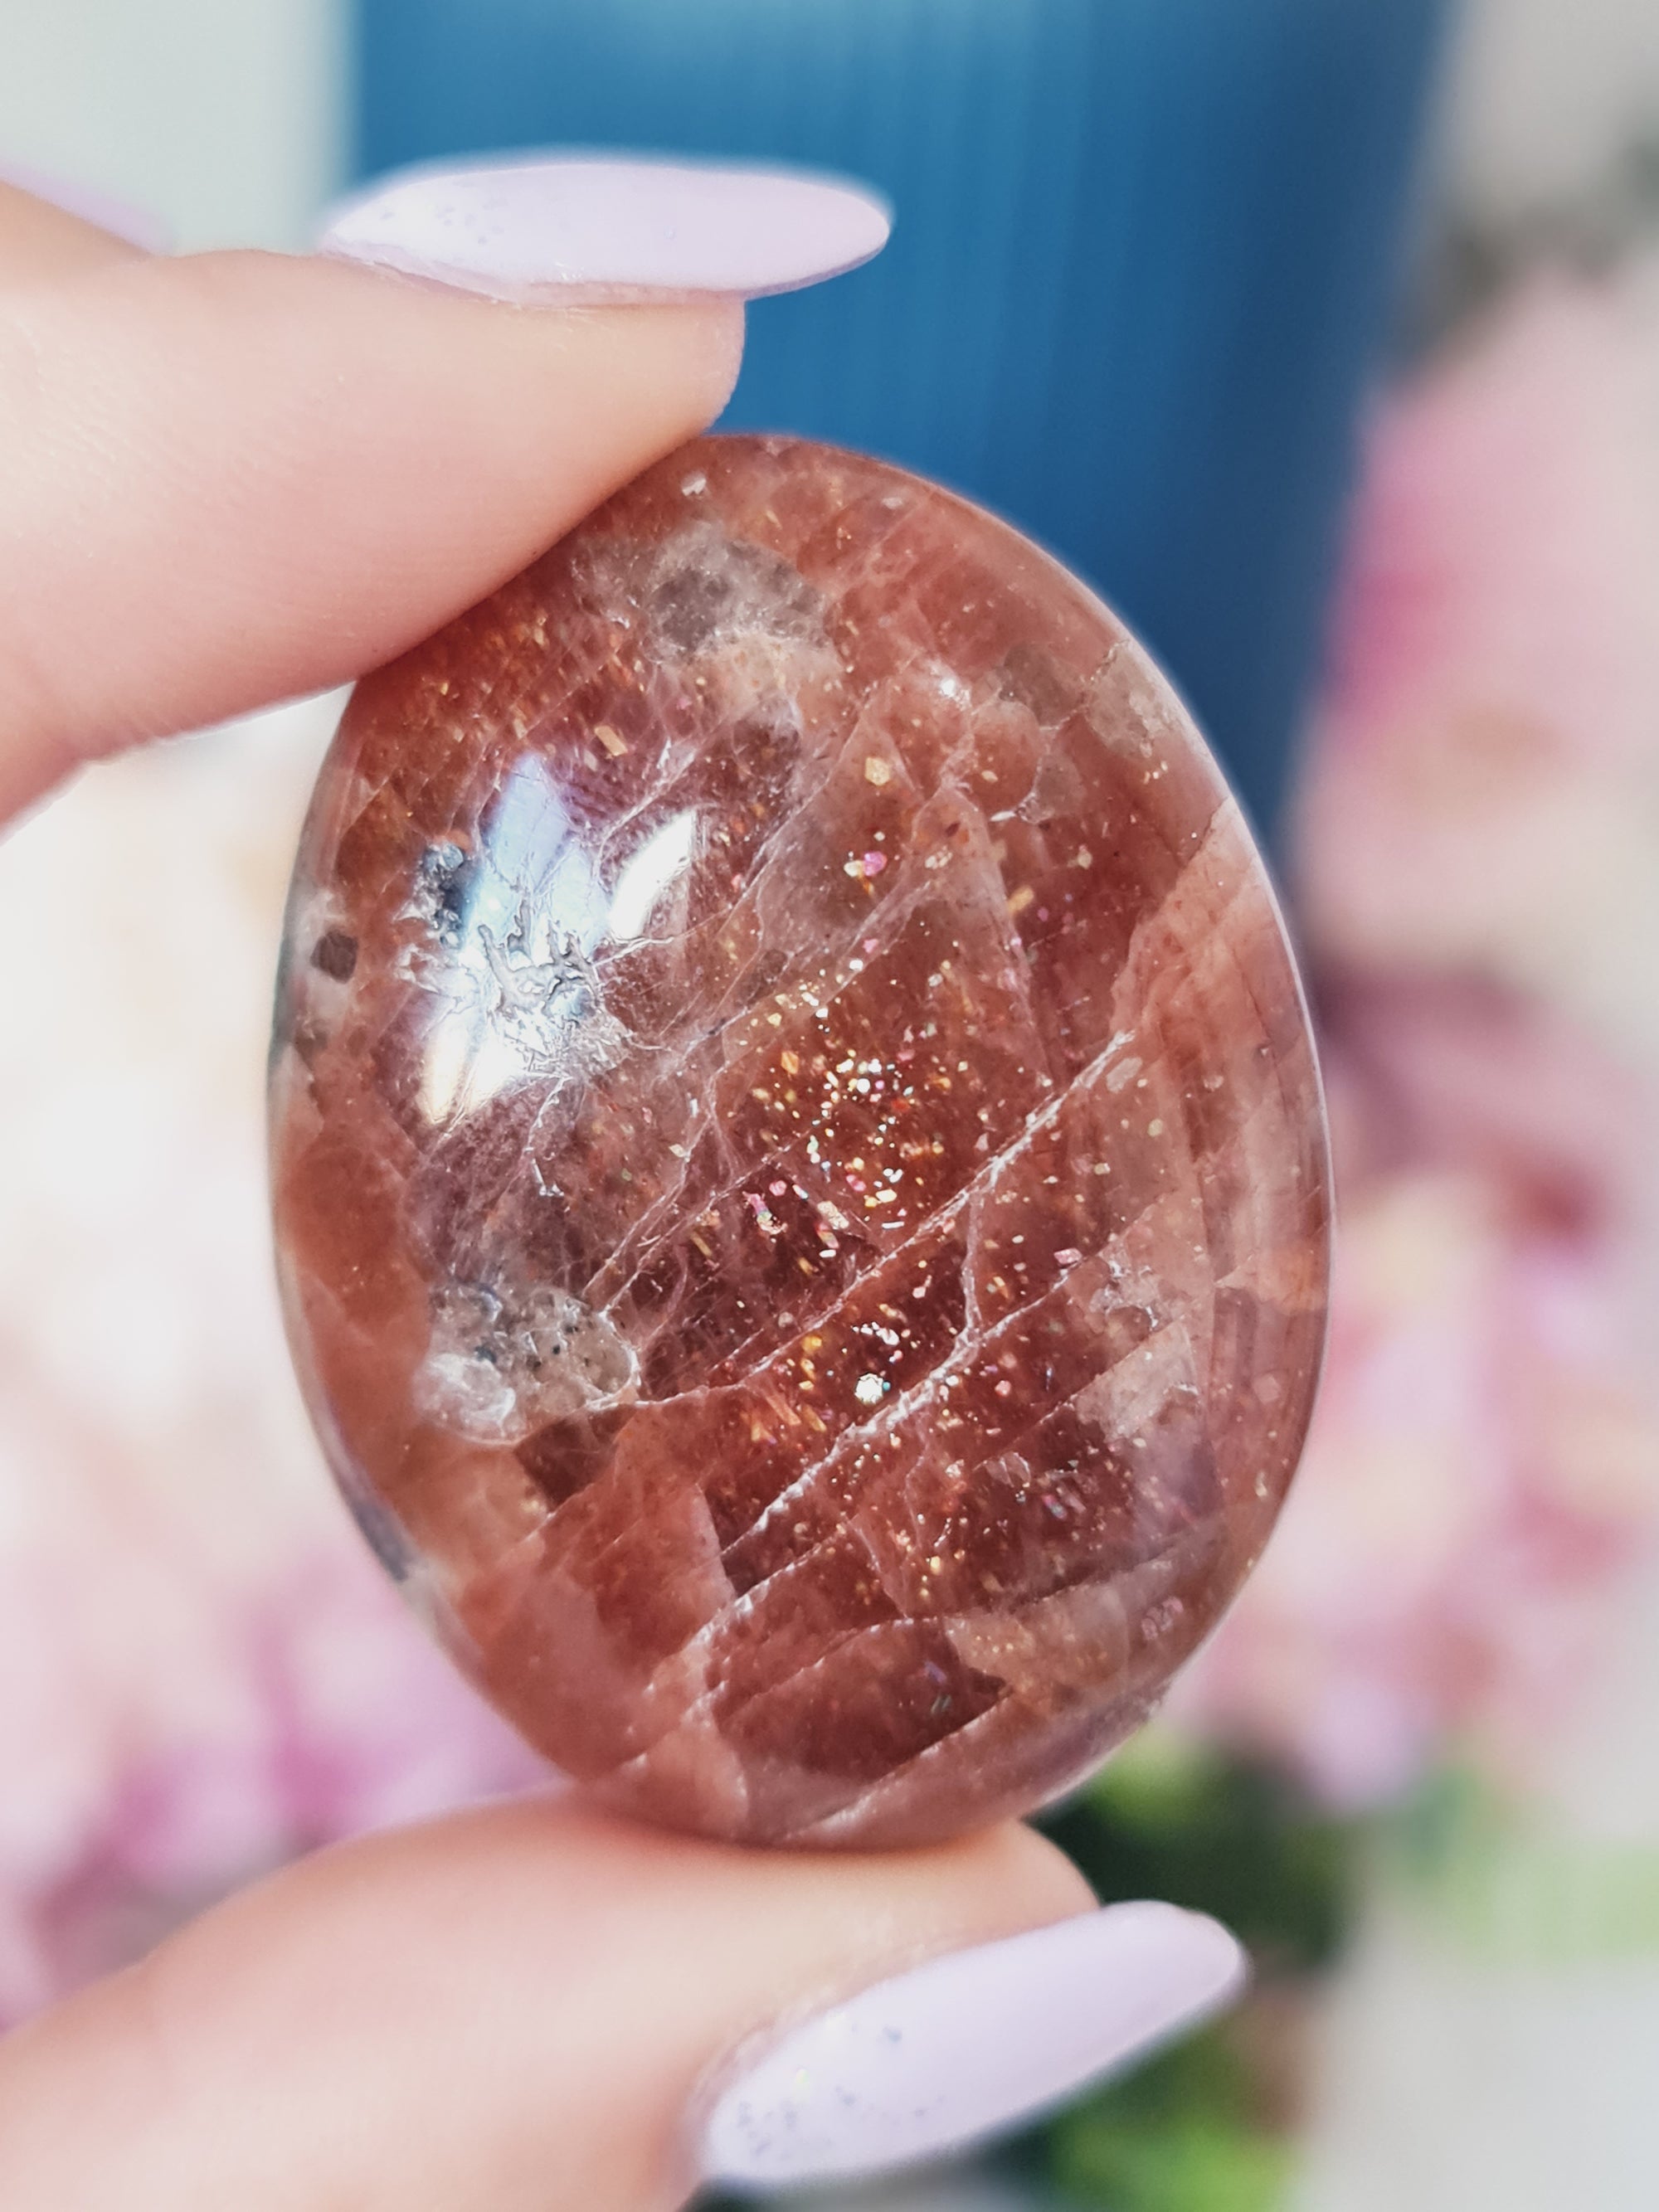 Red moonstone with sunstone inclusions